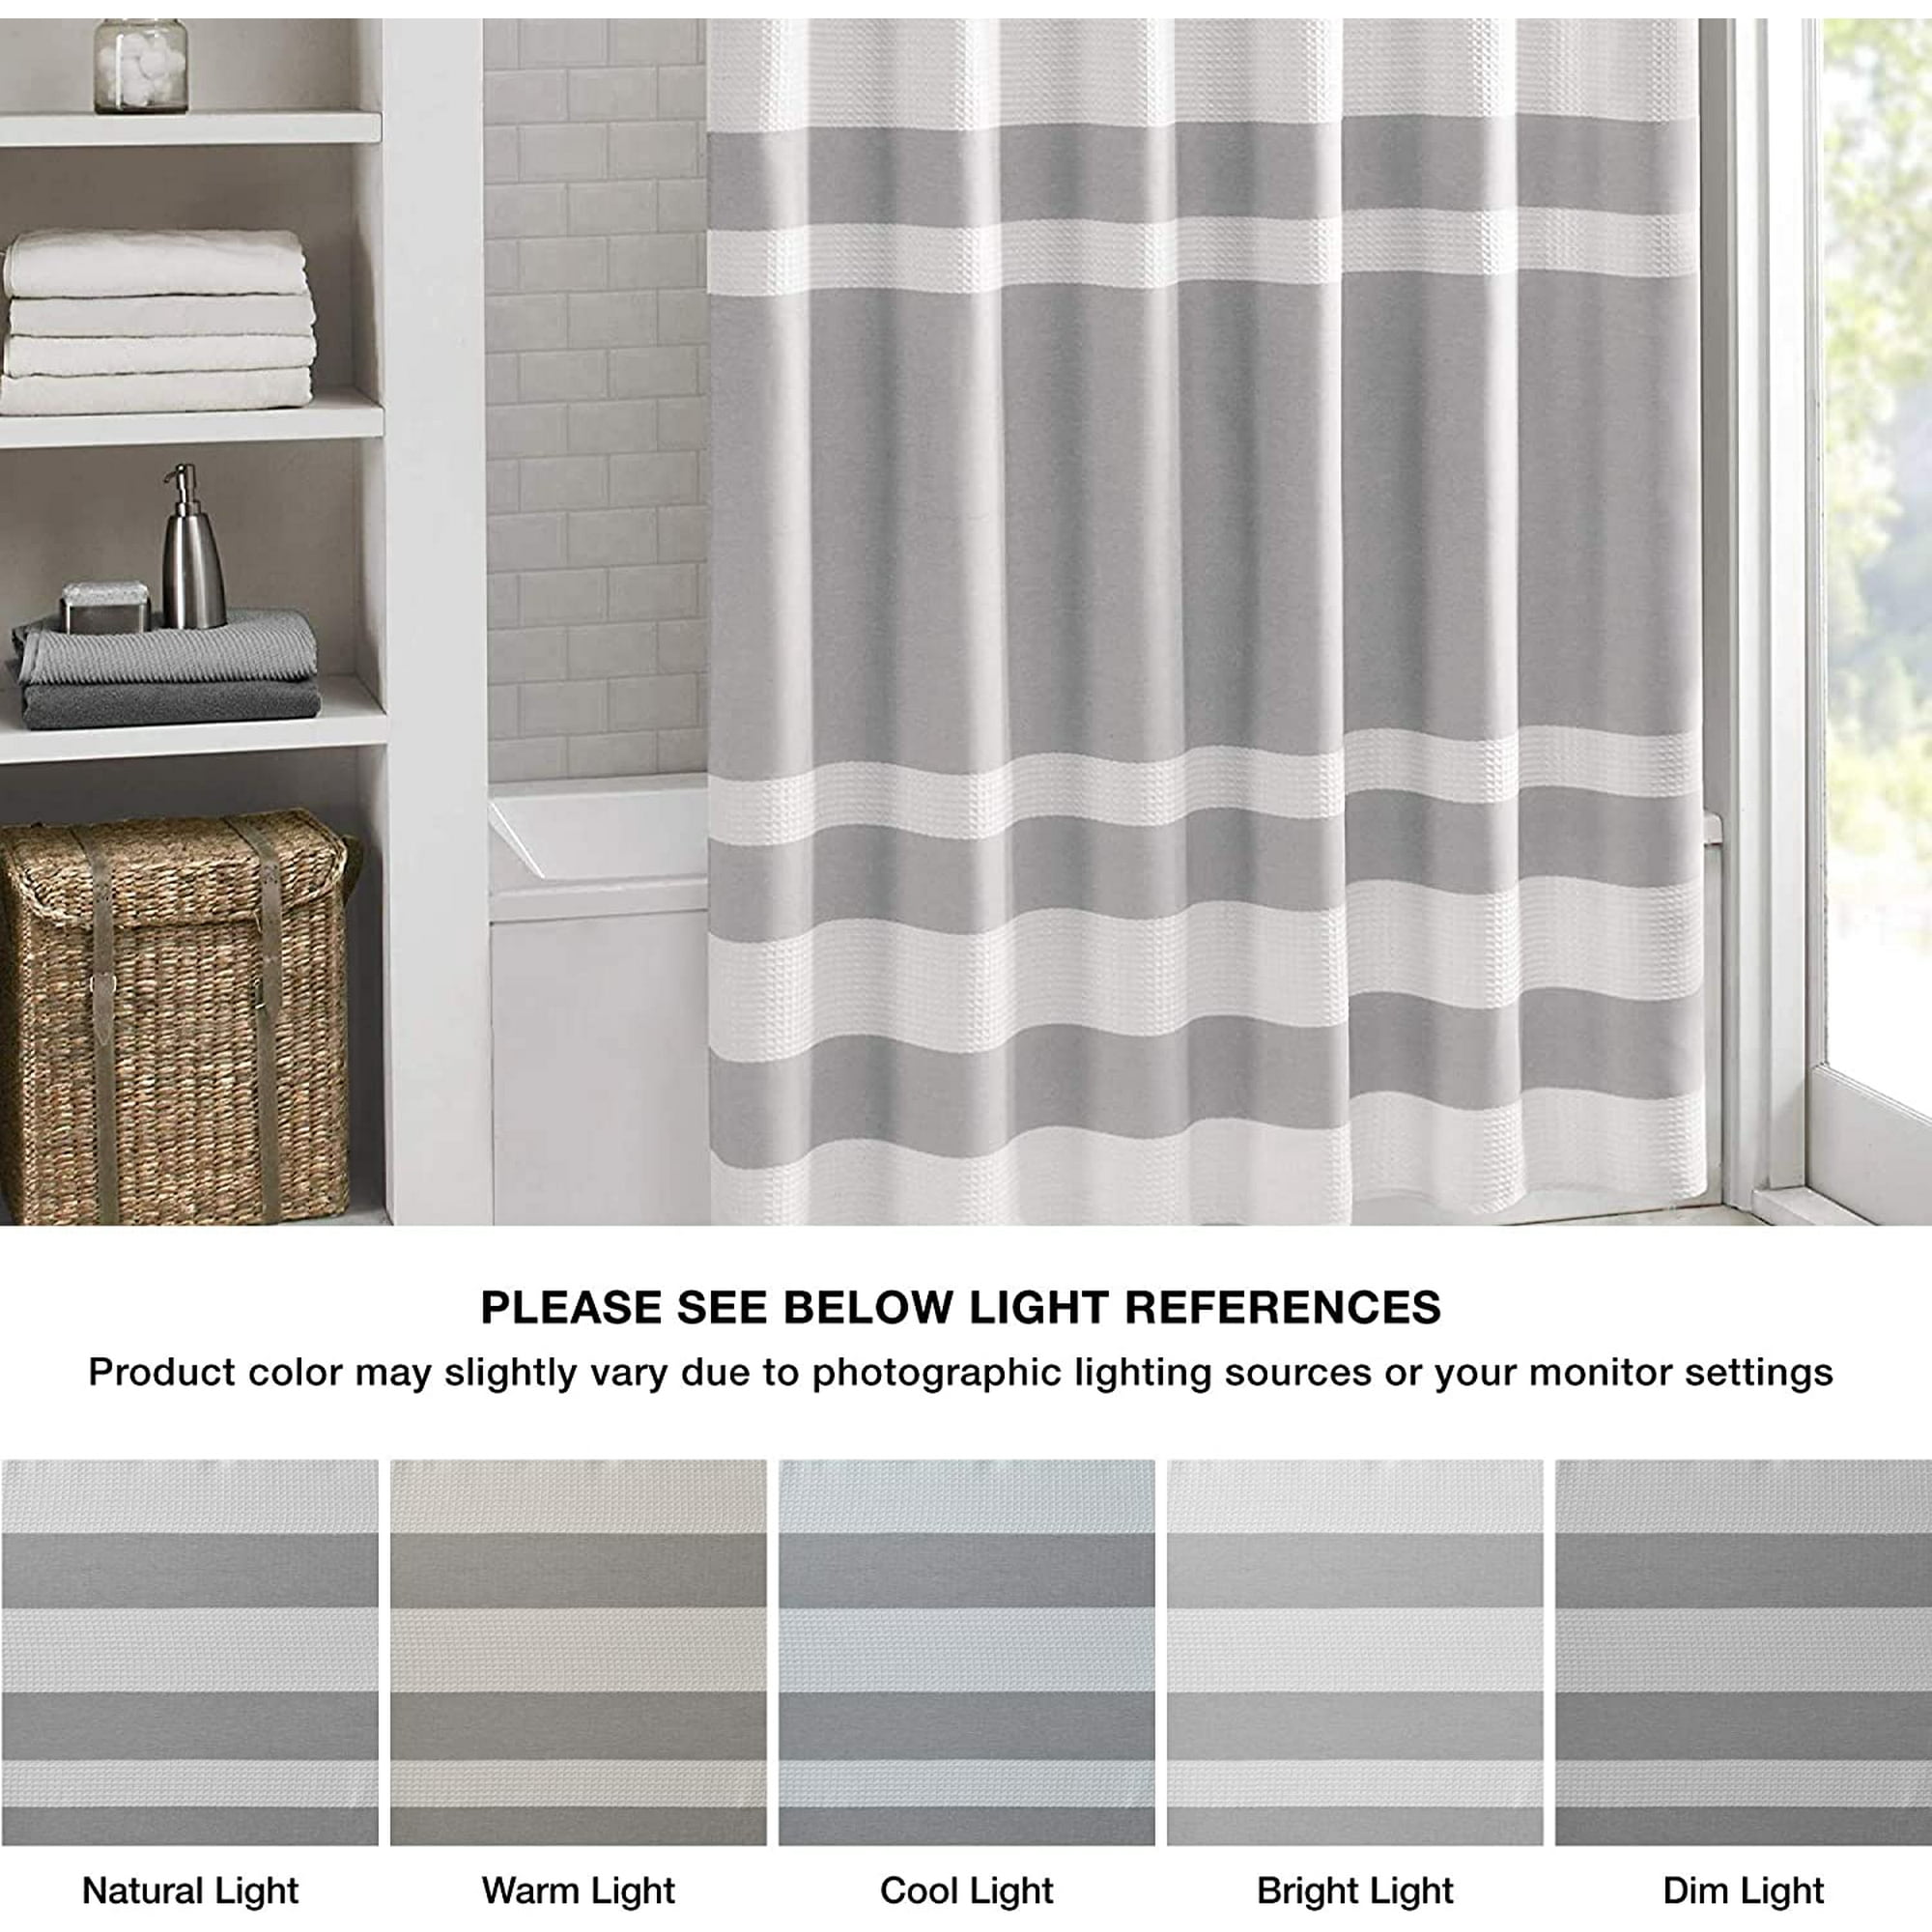 Stall 54X78 Taupe Madison Park Spa Waffle Shower Curtain Pieced Solid Microfiber Fabric with 3M Scotchgard Water Repellent Treatment Modern Home Bathroom Decorations 